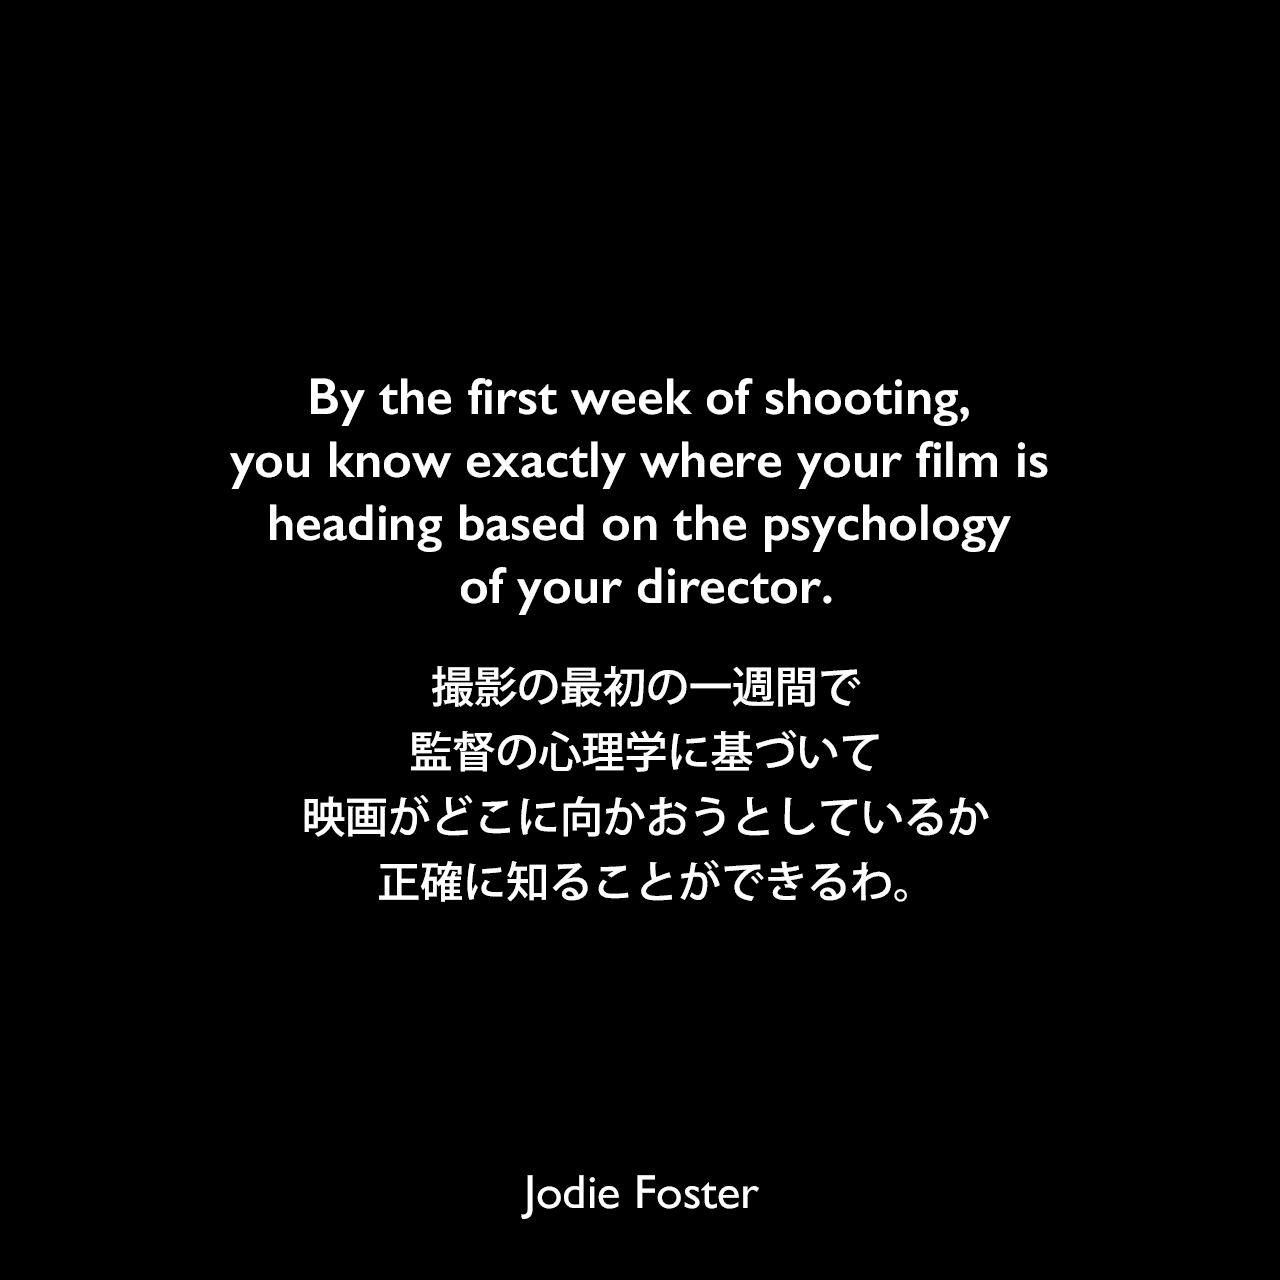 By the first week of shooting, you know exactly where your film is heading based on the psychology of your director.撮影の最初の一週間で、監督の心理学に基づいて映画がどこに向かおうとしているか正確に知ることができるわ。Jodie Foster